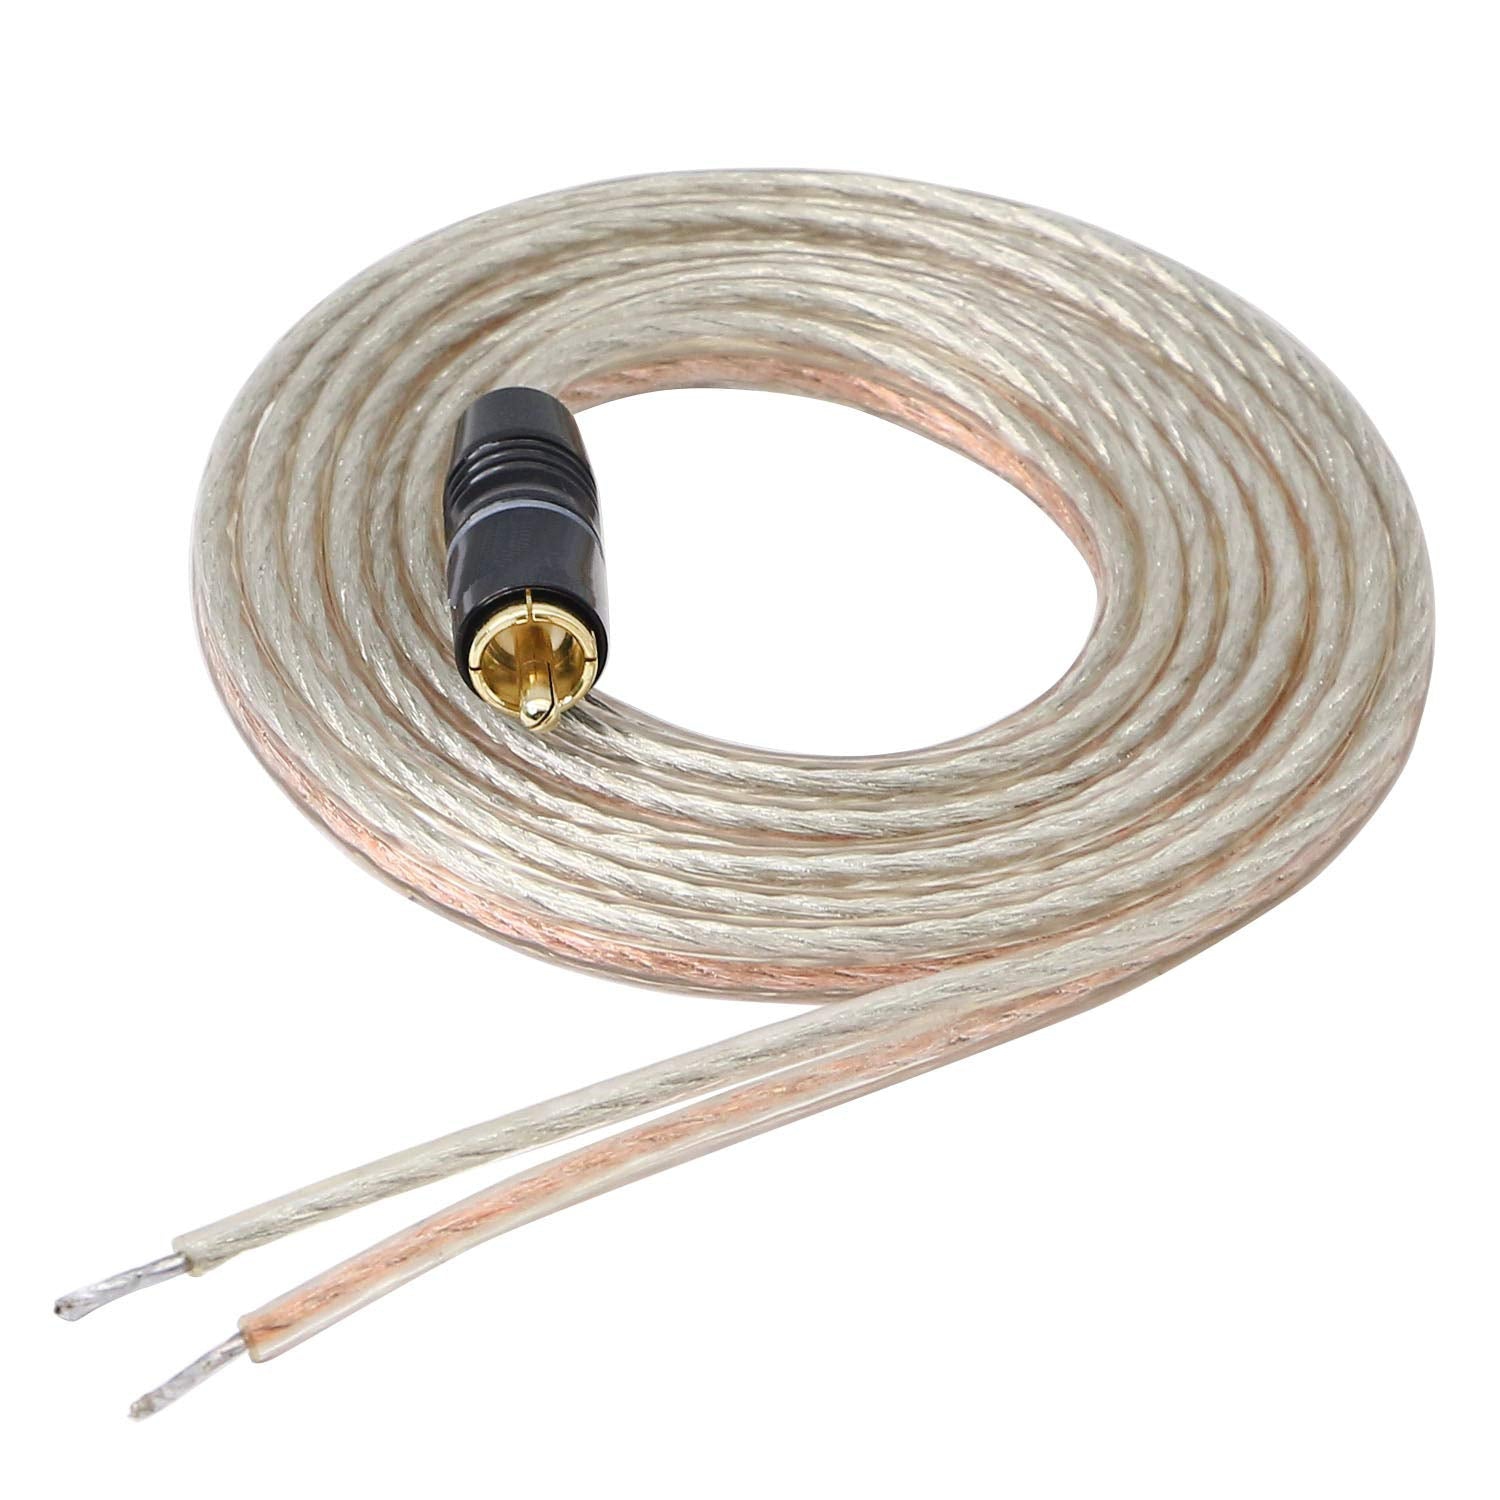 RCA Speaker Wire, Speaker Cable to RCA Plug, Gold Plated RCA Connector High Level Audio Cable for Amplifiers